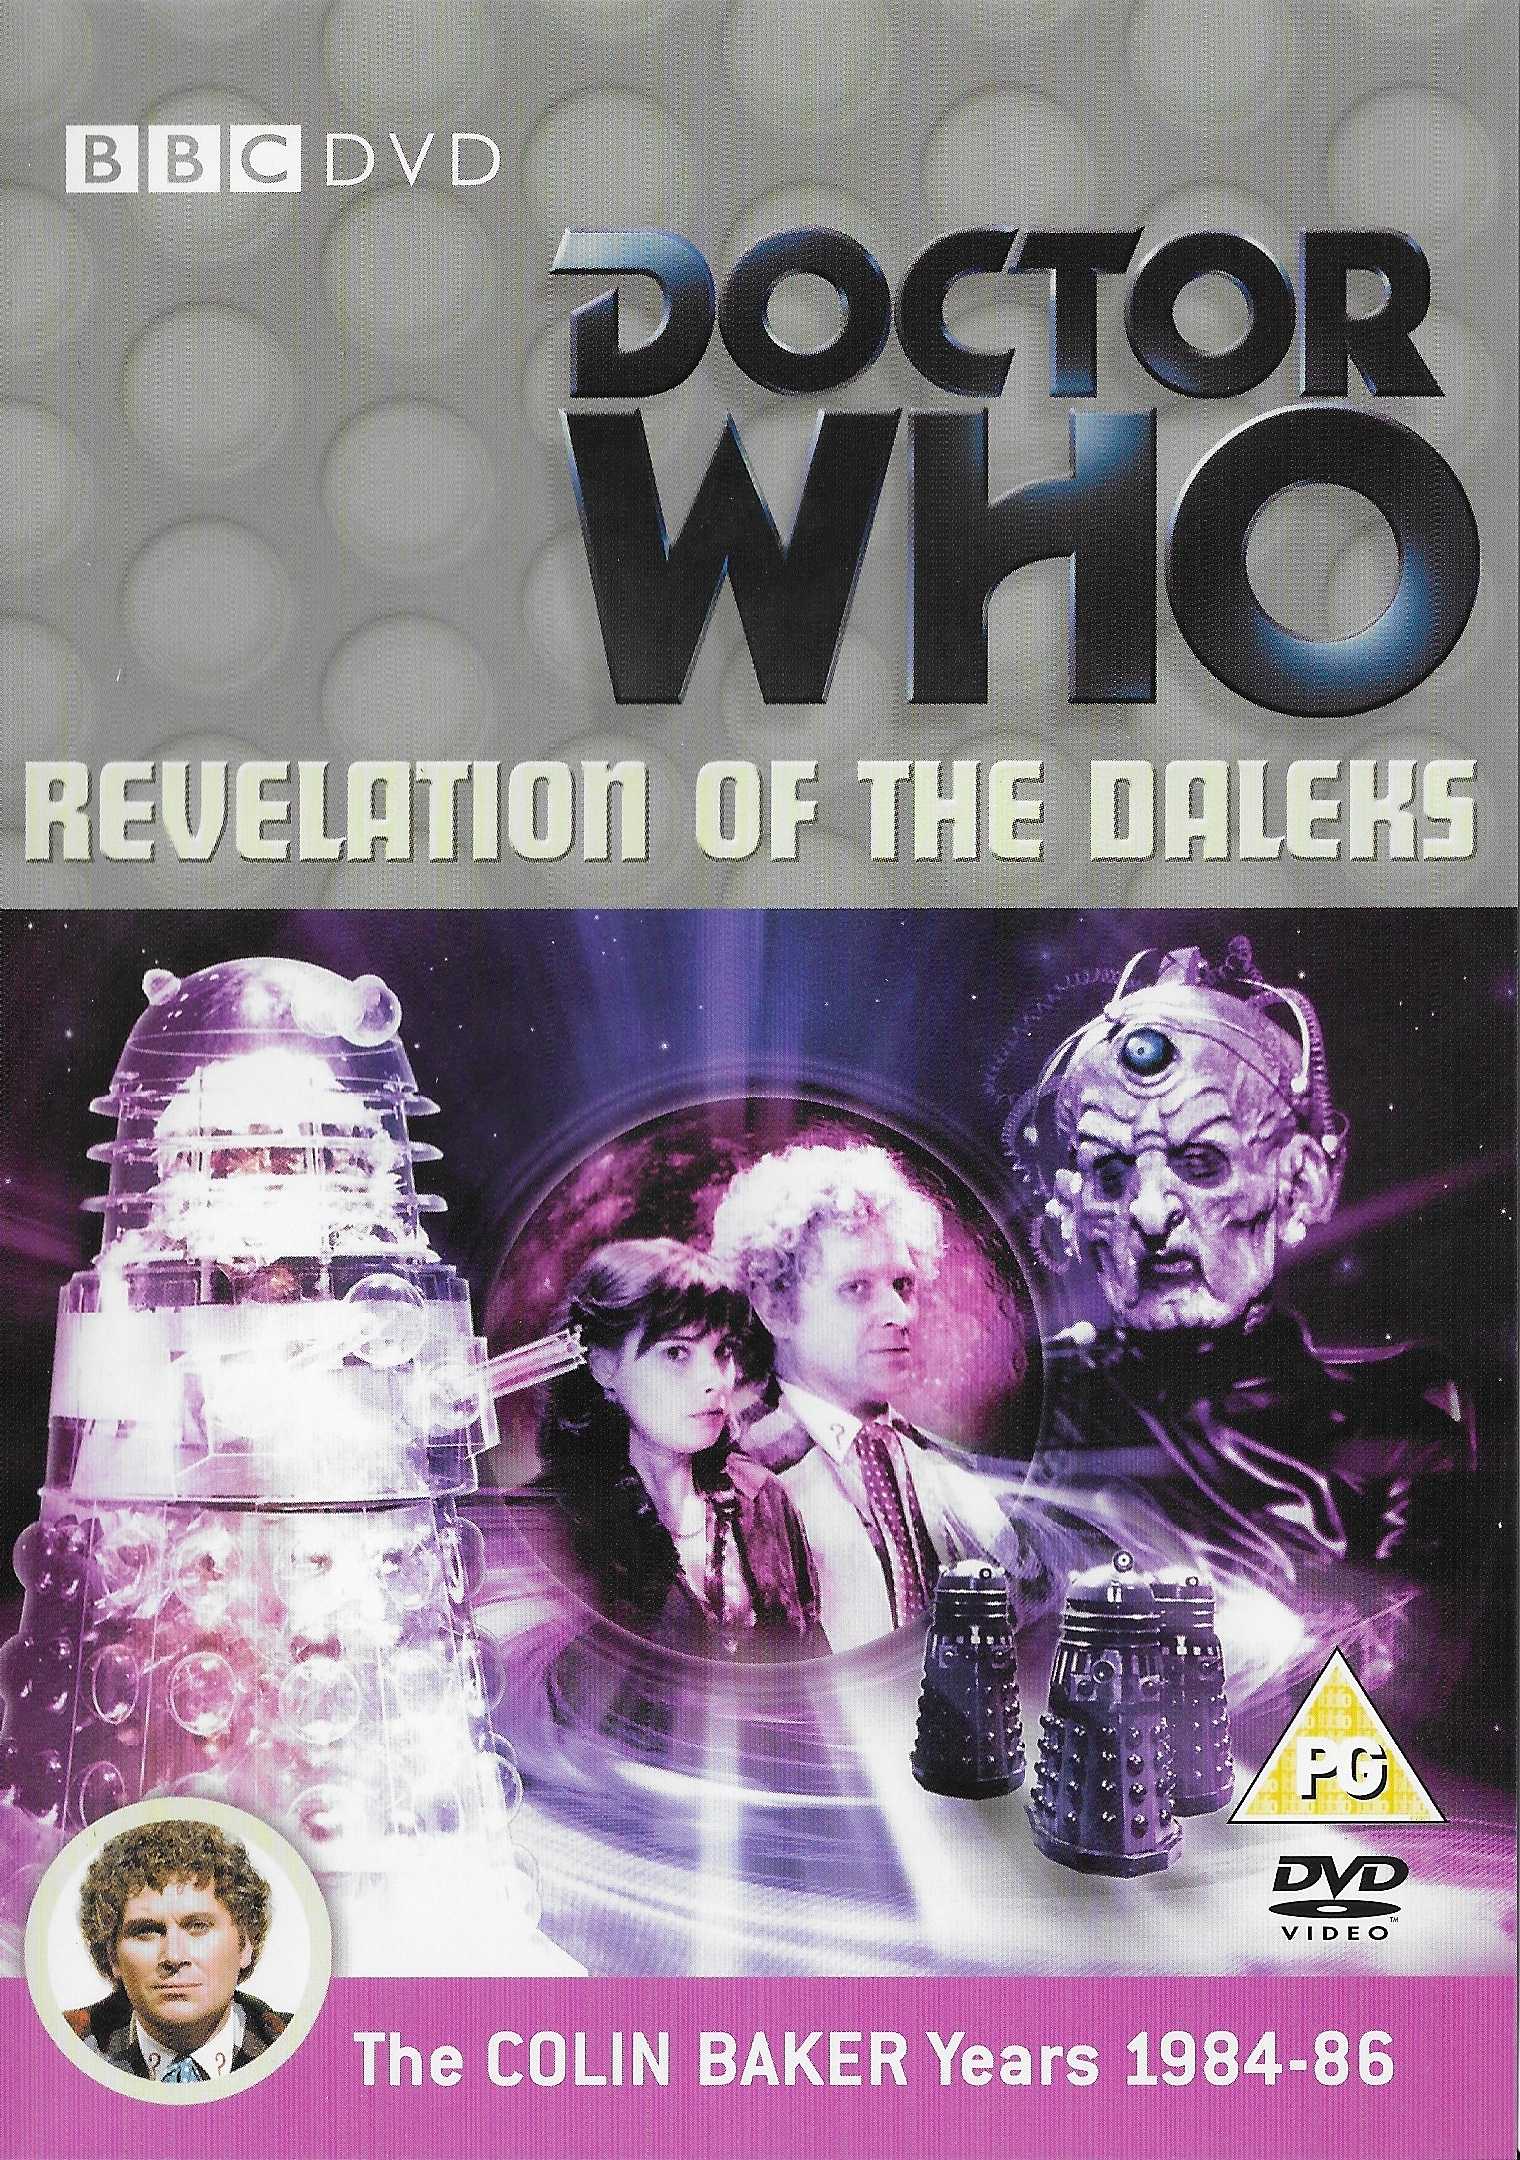 Picture of BBCDVD 1357 Doctor Who - Revelation of the Daleks by artist Eric Saward from the BBC dvds - Records and Tapes library